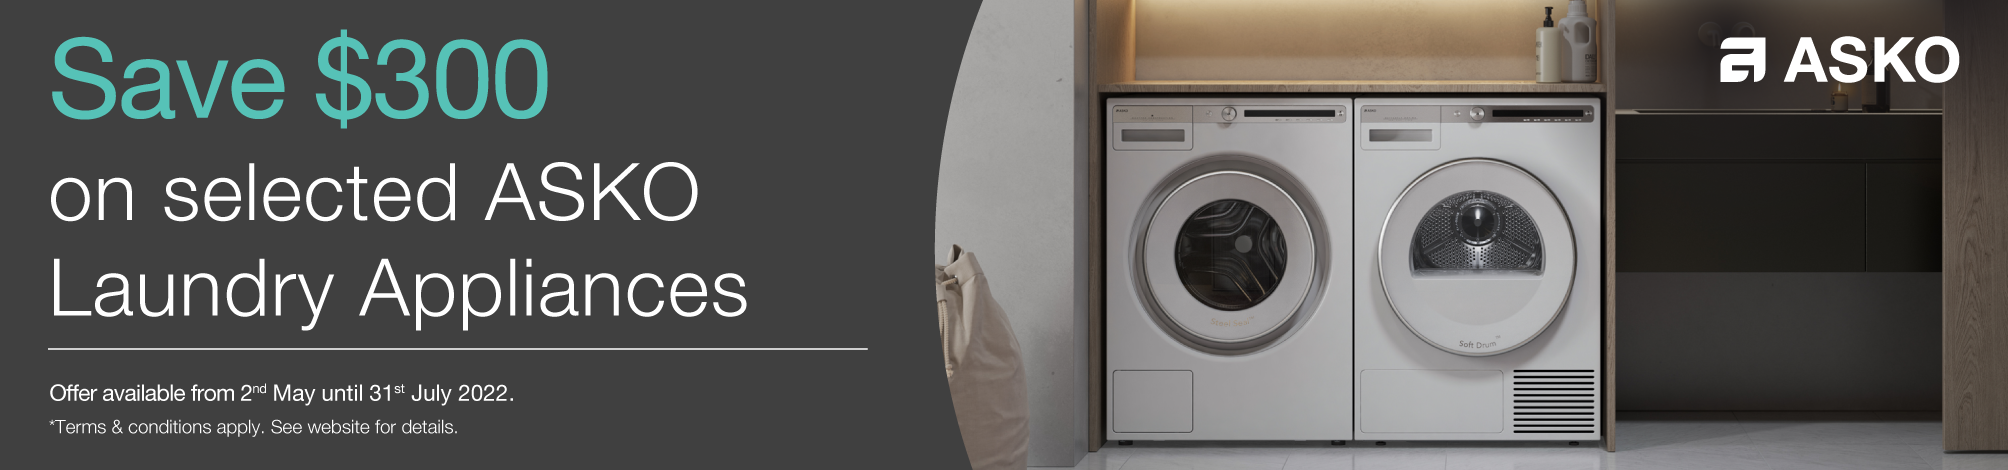 Save $300 on selected Asko Laundry Appliances